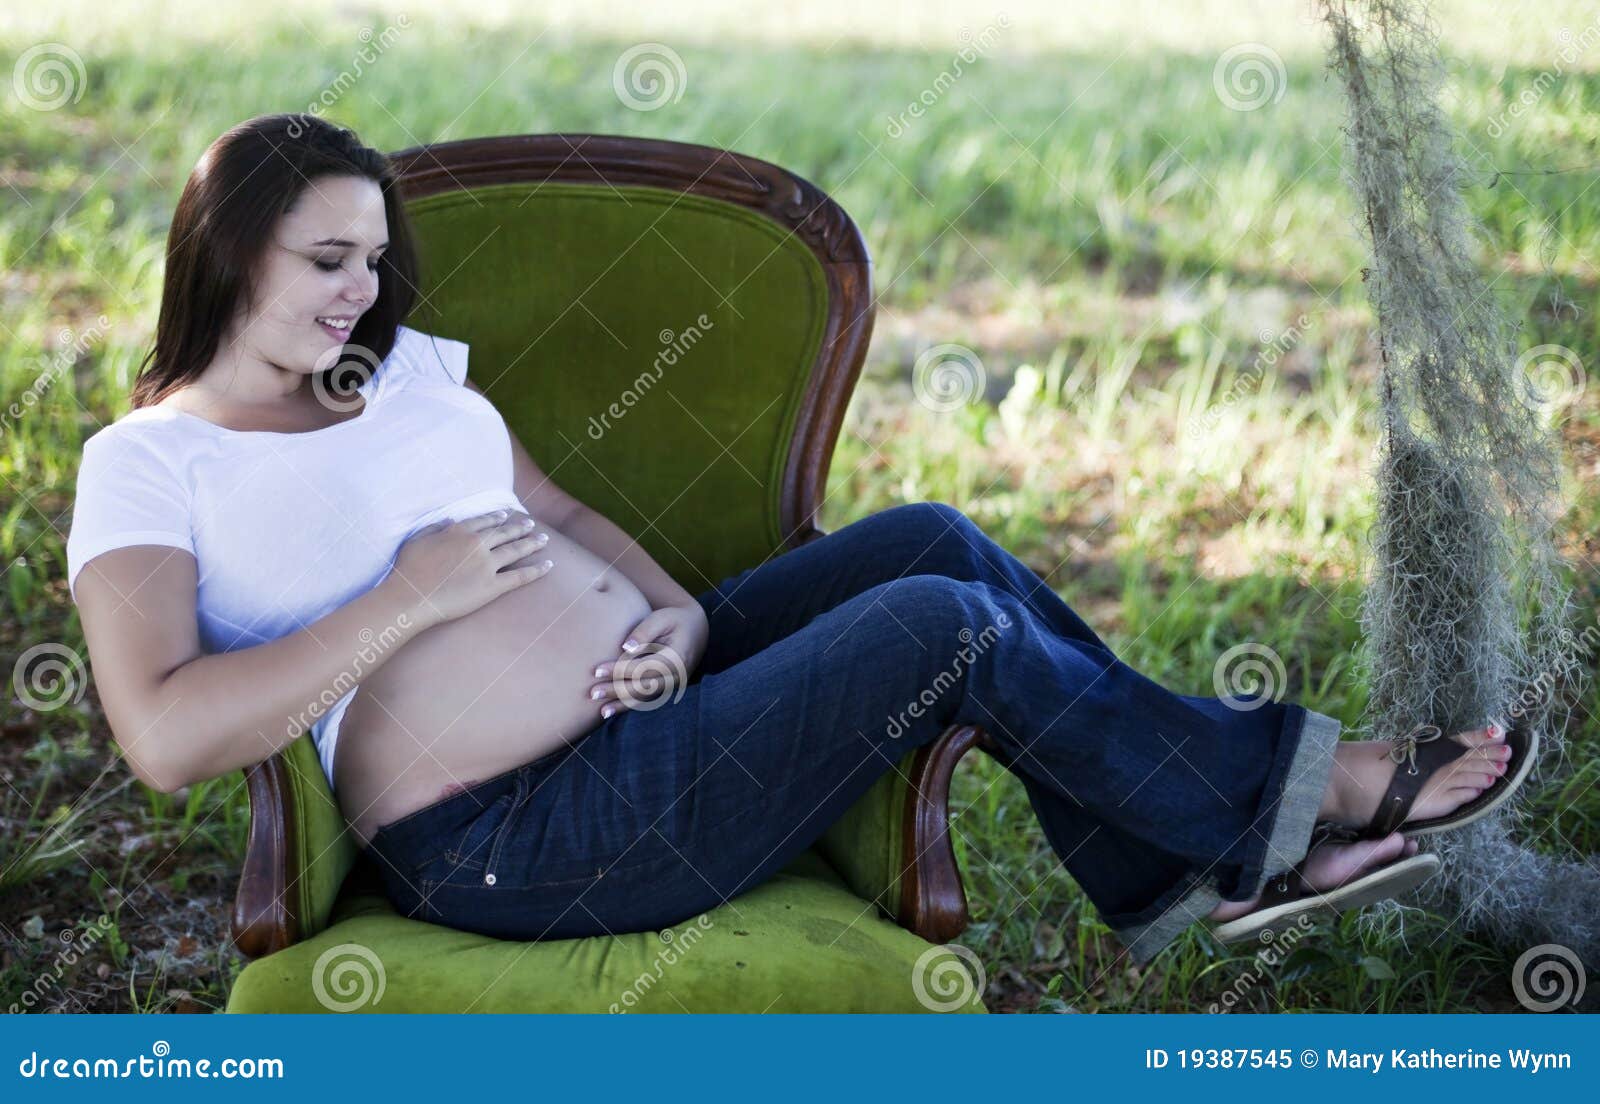 11,453 Pregnant Woman Chair Images, Stock Photos, 3D objects